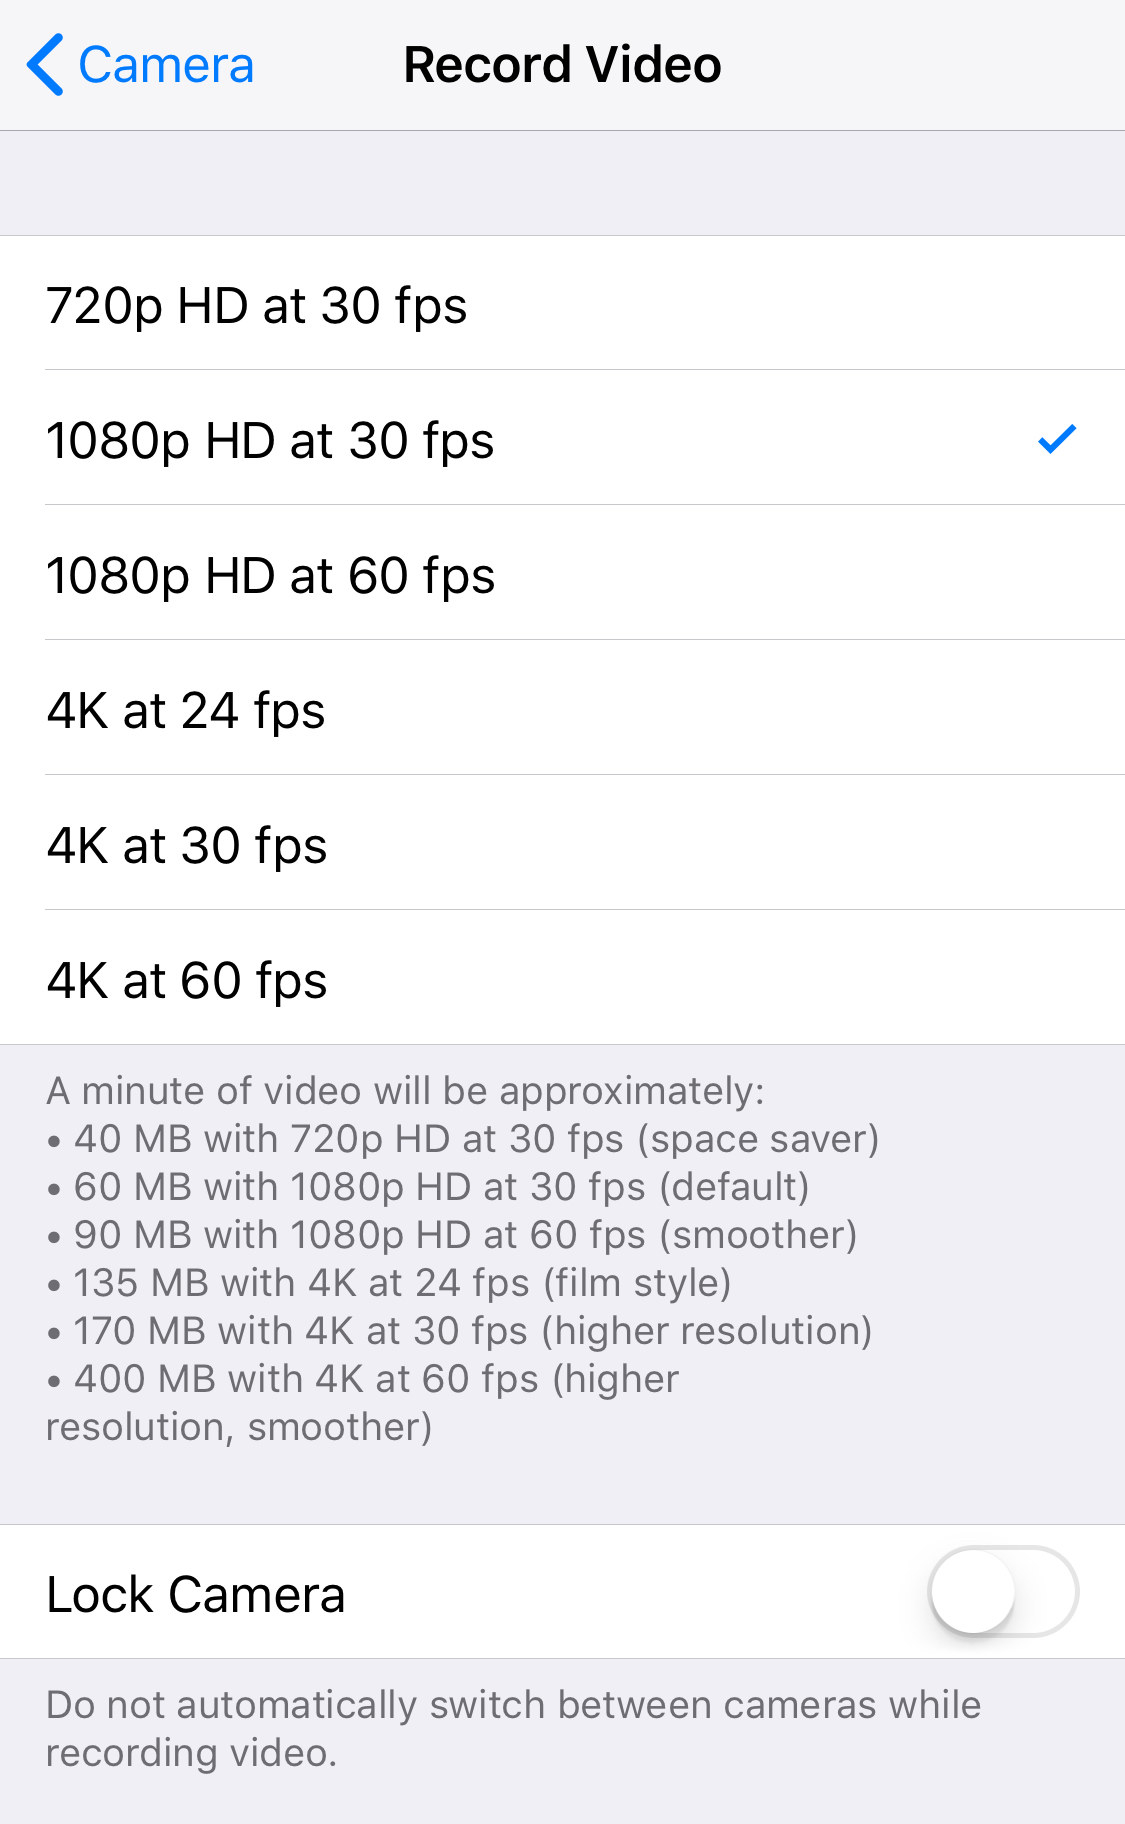 Record Video resolution options